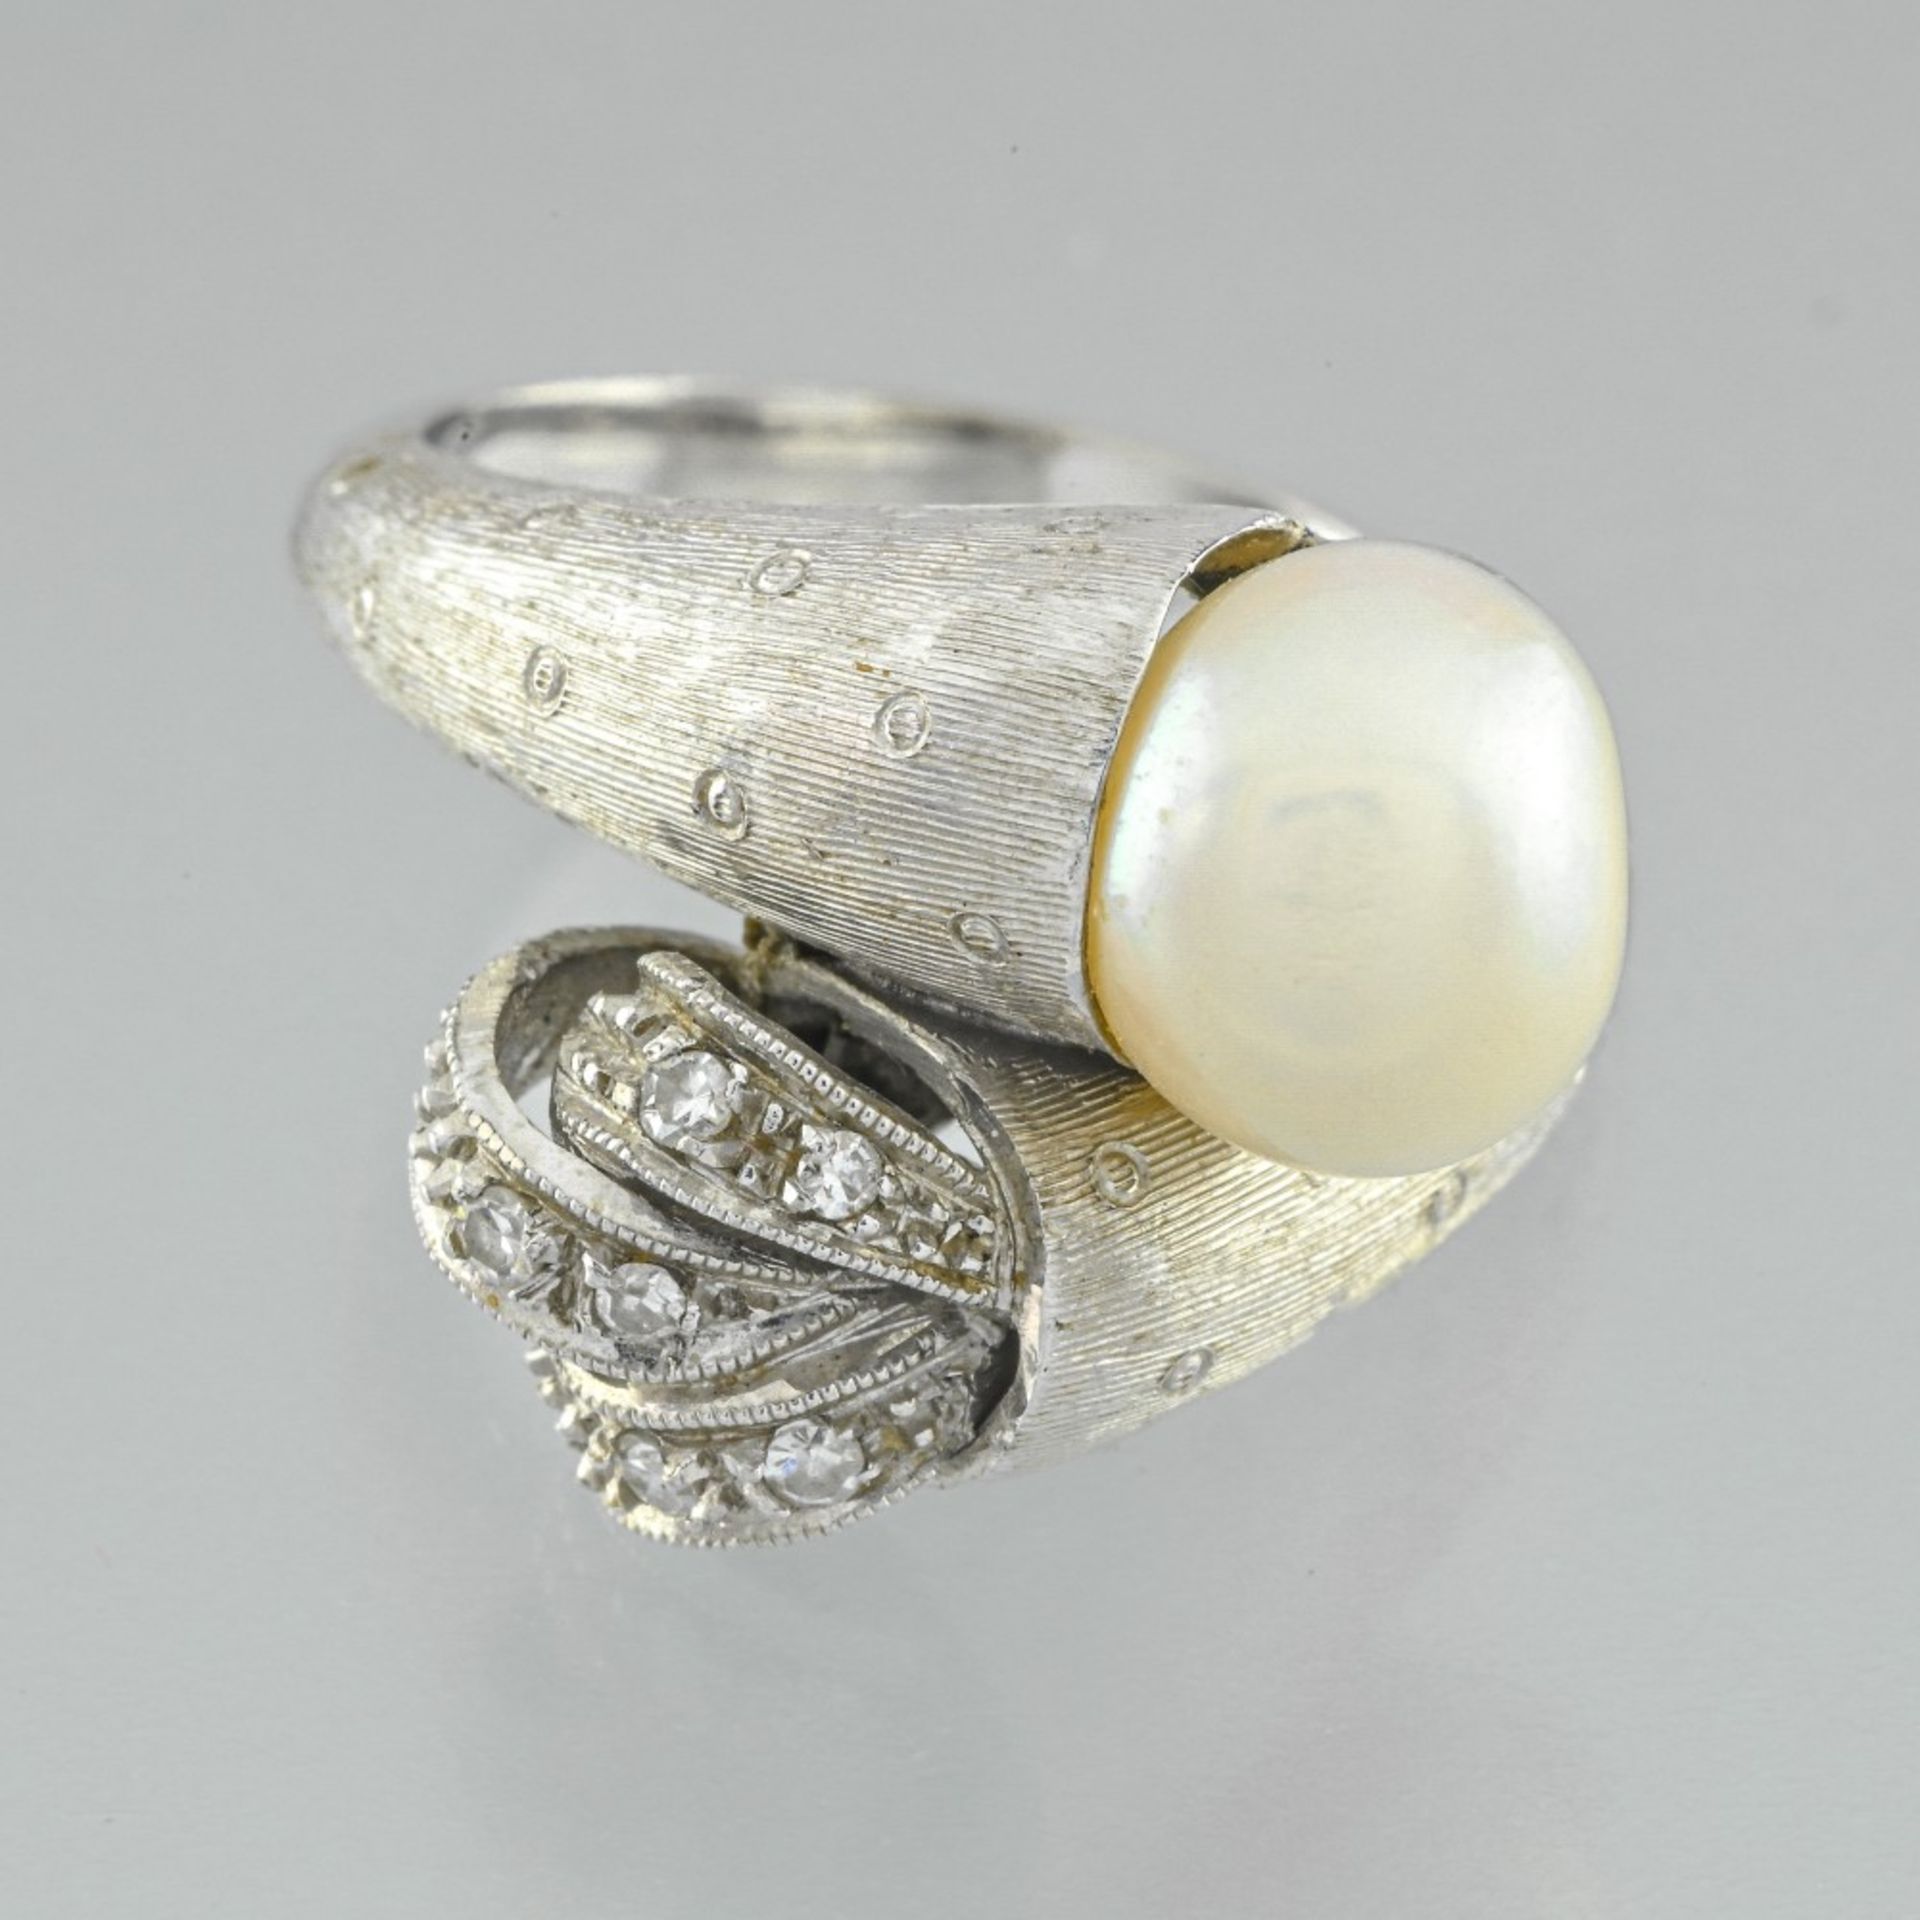 You and me ring pearl and diamond in white gold 18 Karat, set with a white pearl of 8 mm diameter - Image 3 of 3